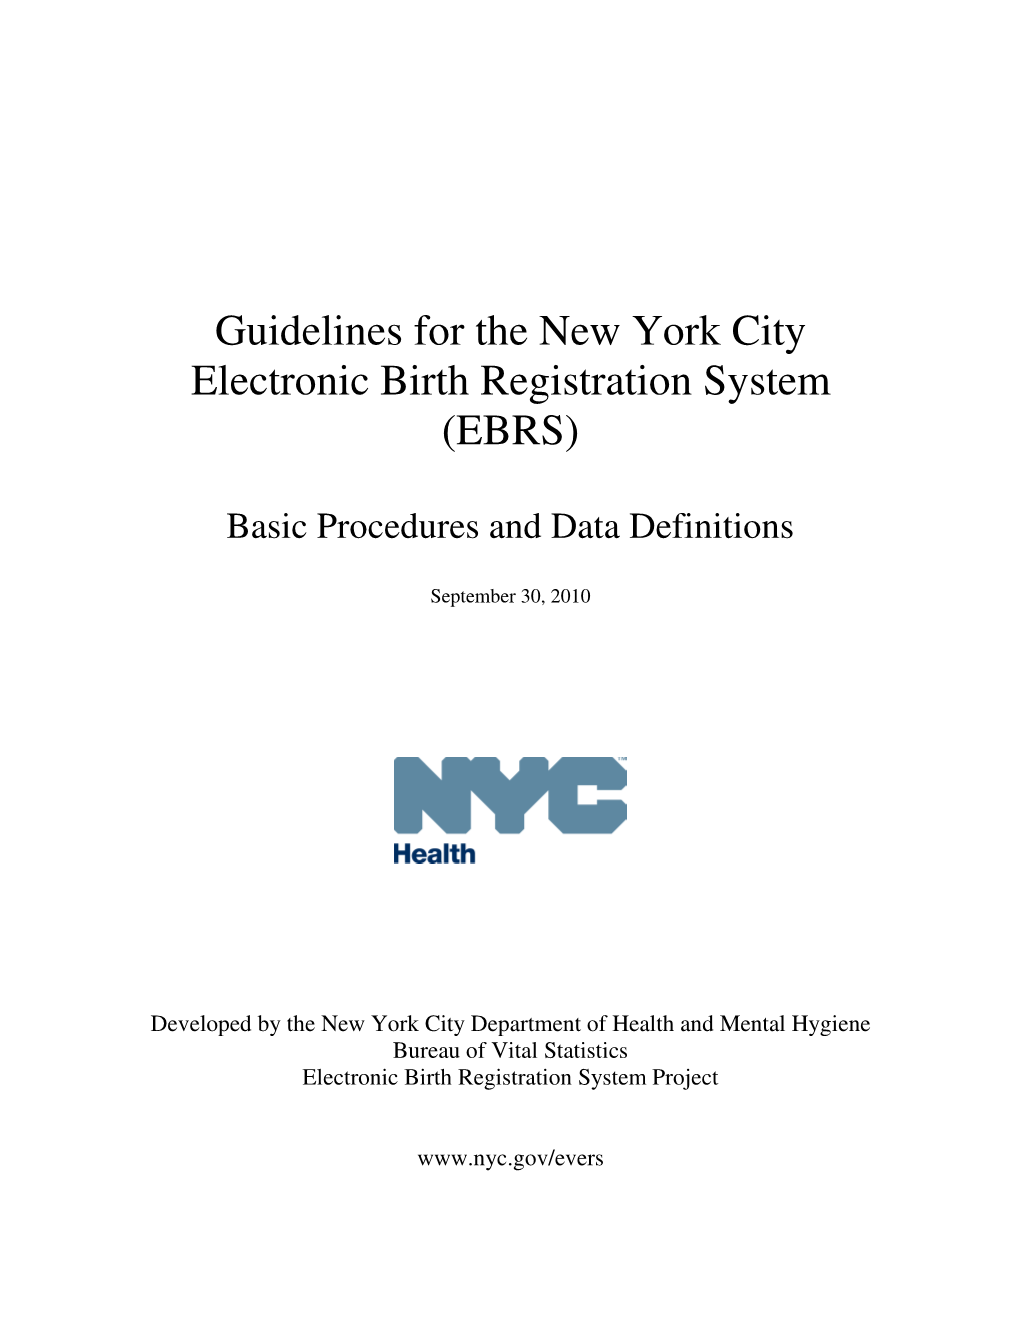 Guidelines for the New York City Electronic Birth Registration System (EBRS)